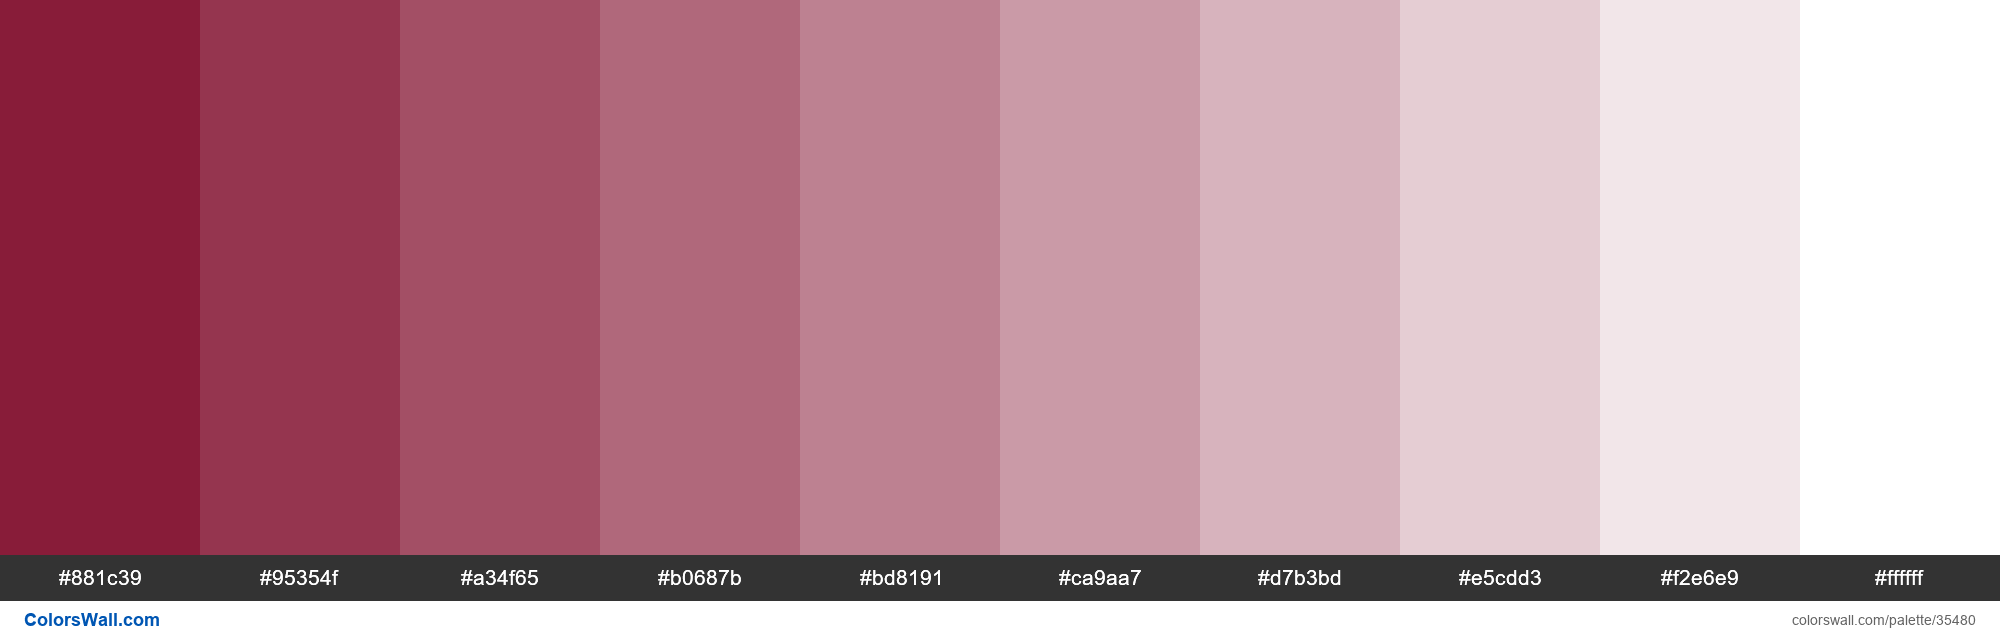 systematisk Give mens Tints XKCD Color wine red #7b0323 hex colors palette | ColorsWall